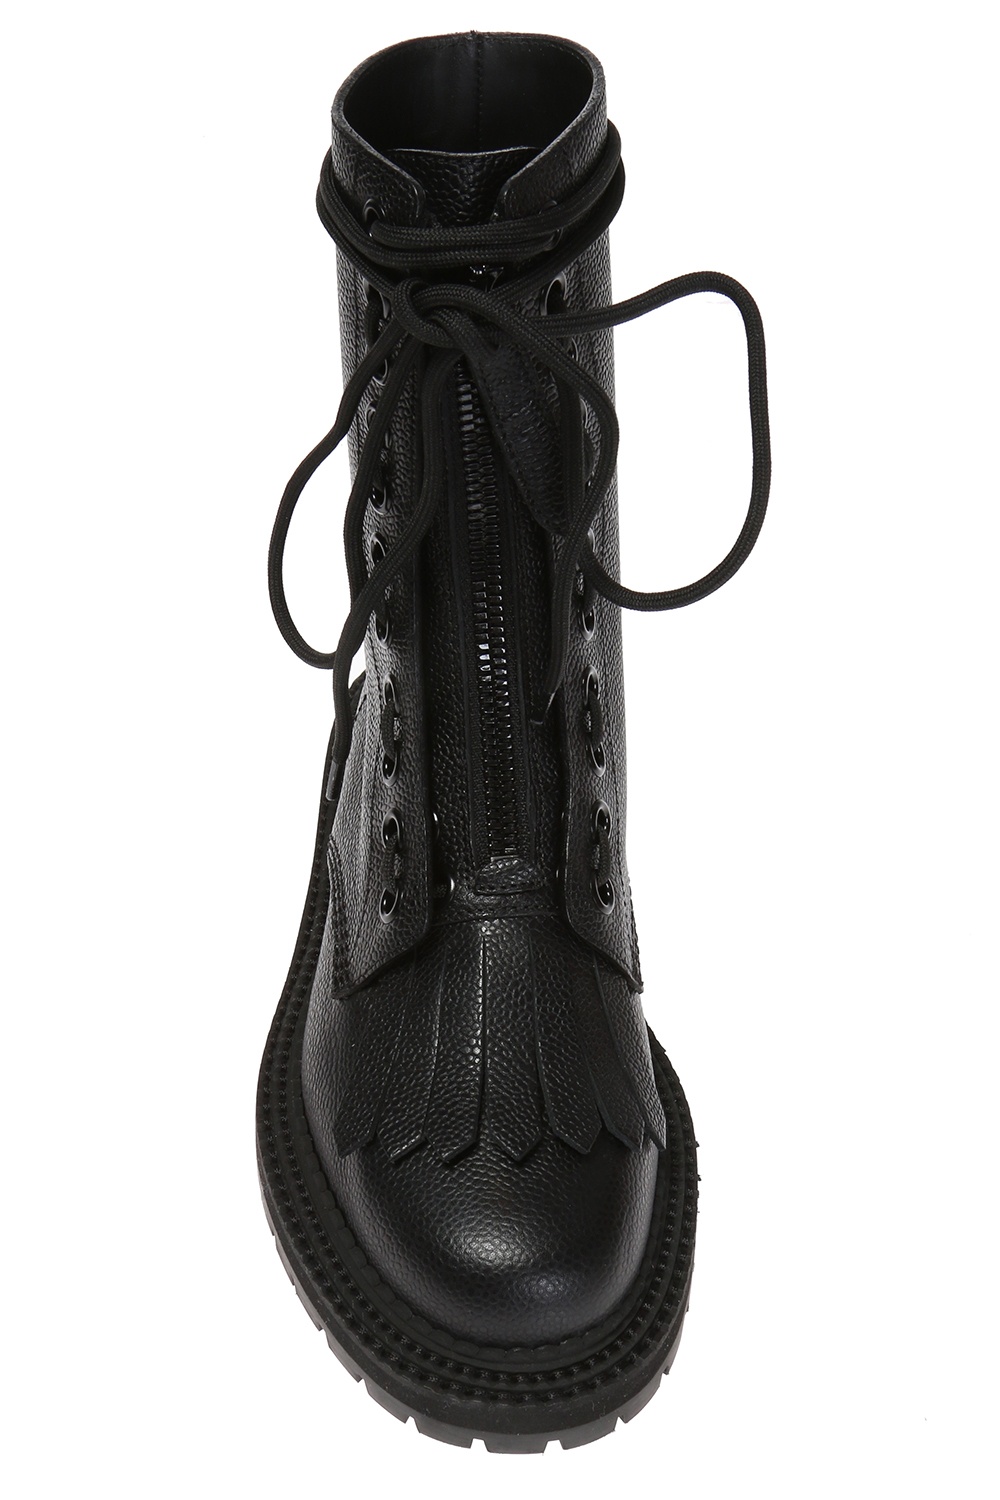 Black 'Military' lace-up boots Burberry - Vitkac KR